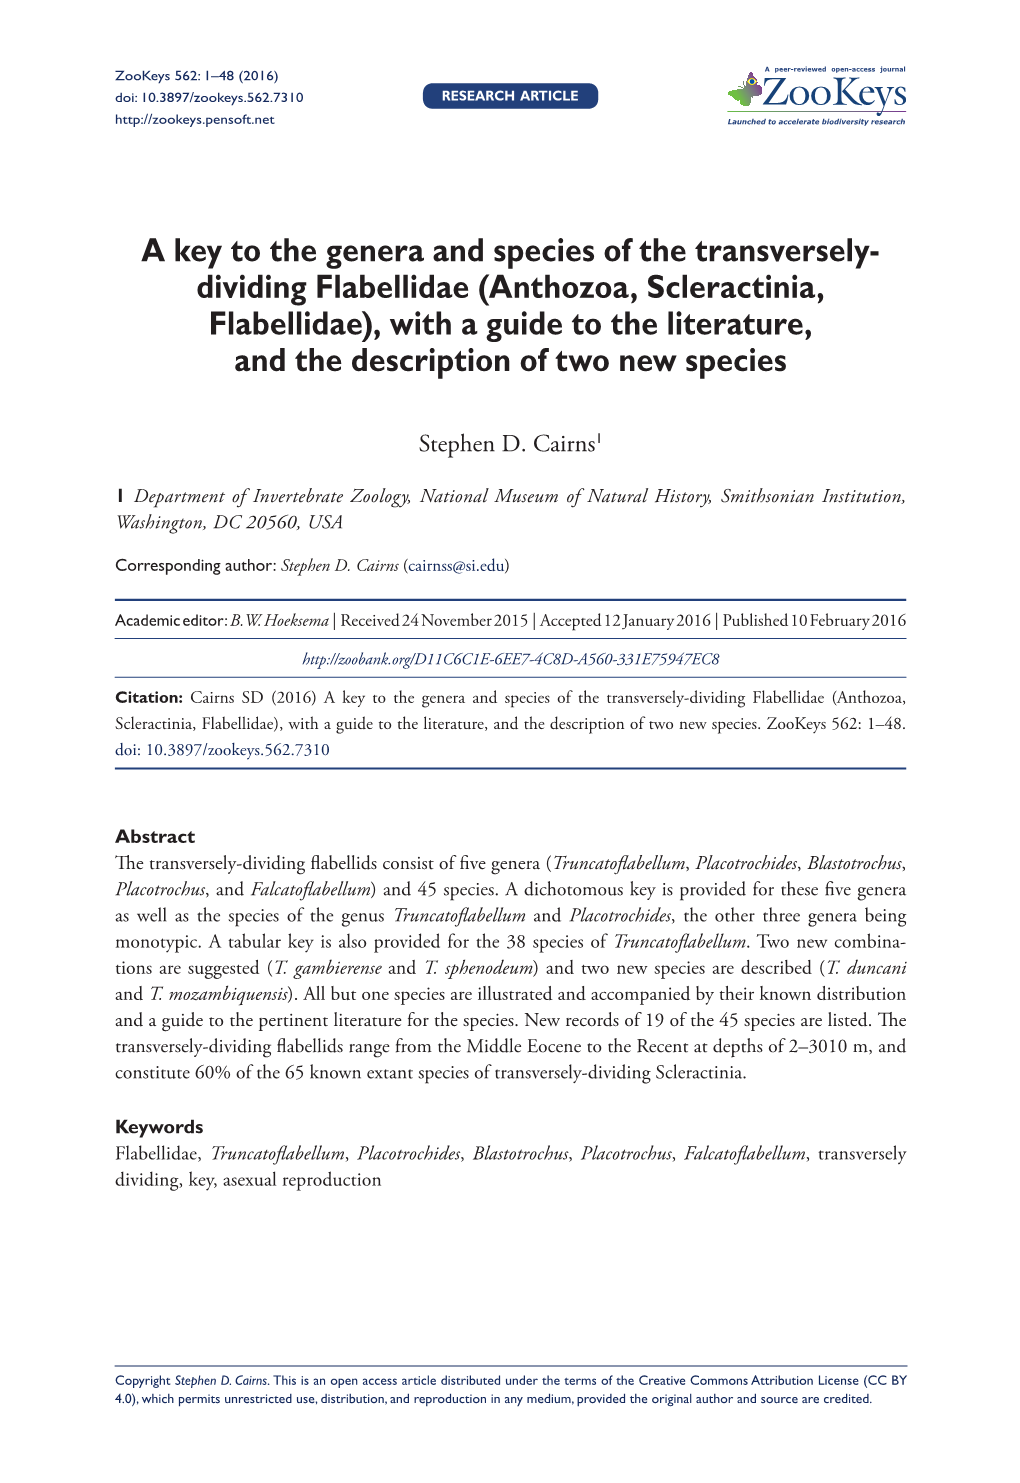 Anthozoa, Scleractinia, Flabellidae), with a Guide to the Literature, and the Description of Two New Species